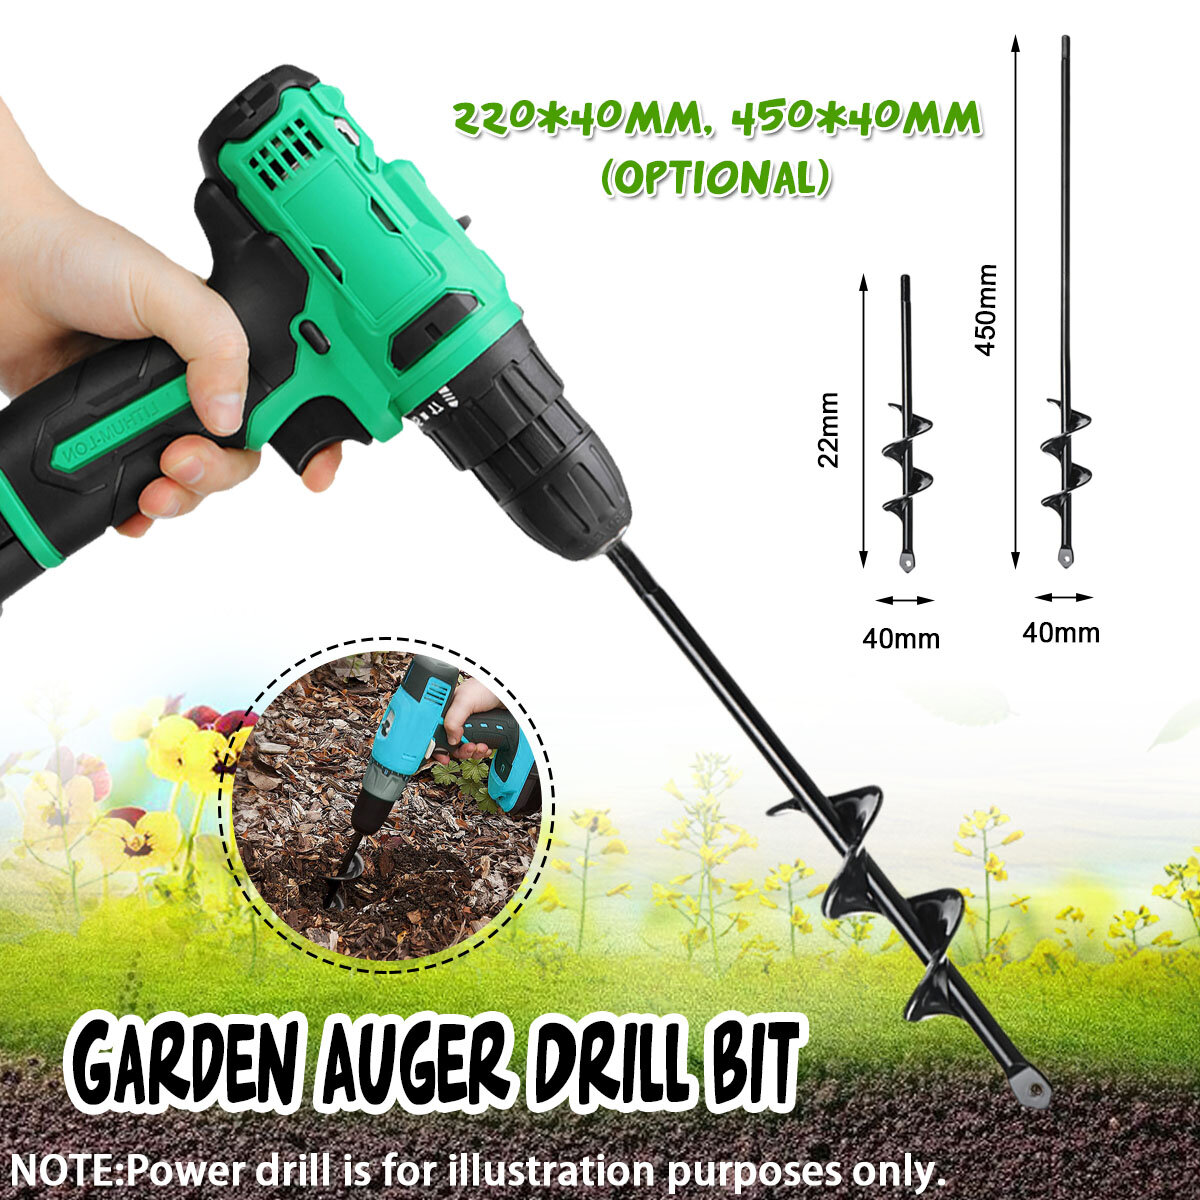 

4x22/4x45cm Garden Auger Small Earth Planter Drill Bit Post Hole Digger Earth Planting Auger Drill Bit for Electric Dril